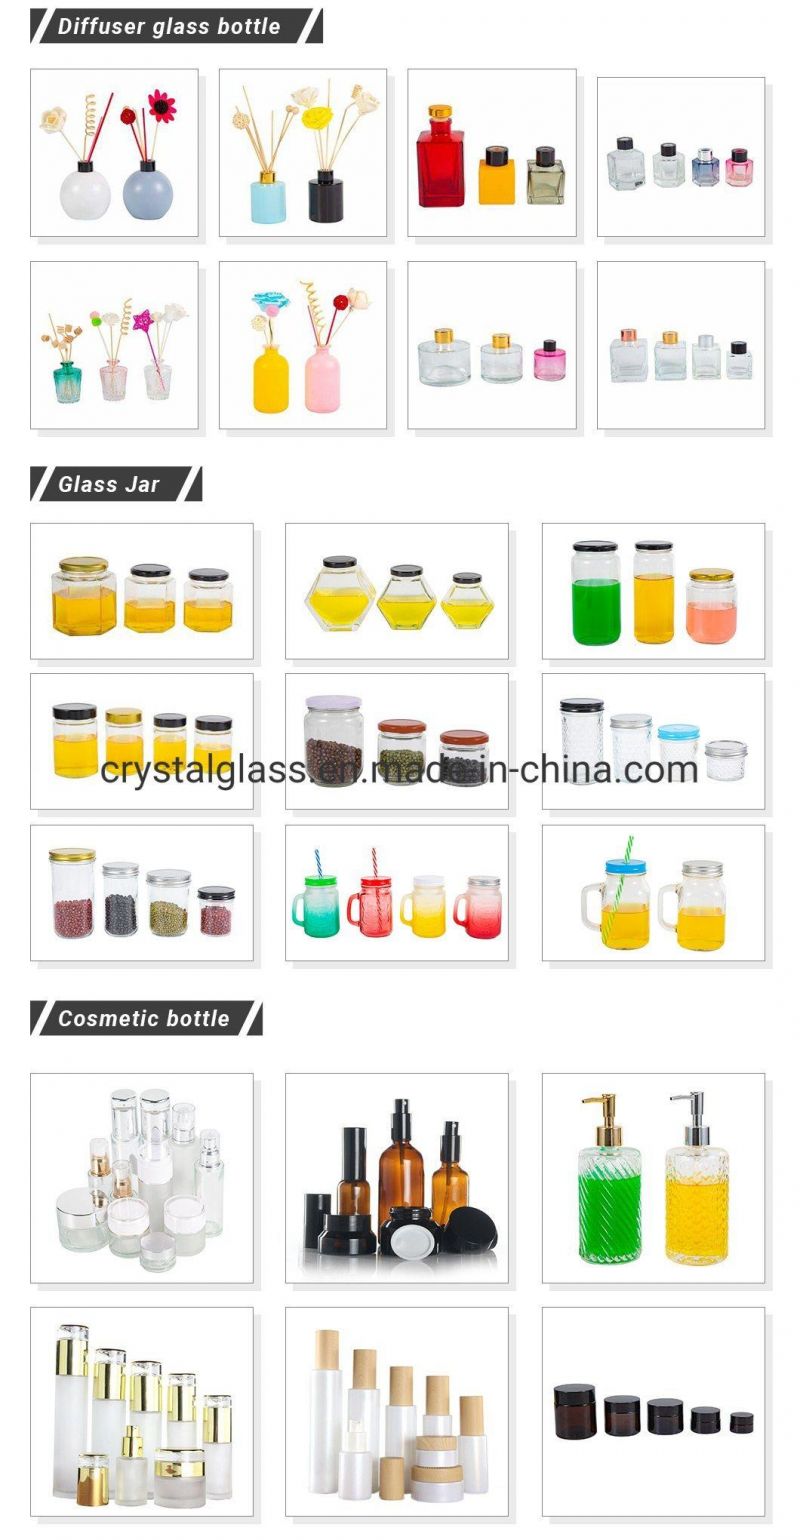 250ml 300ml 500ml 800ml Slim Cylinder Classic Style Cold Pressed Beverage Glass Juice Bottle with PP Caps Voss